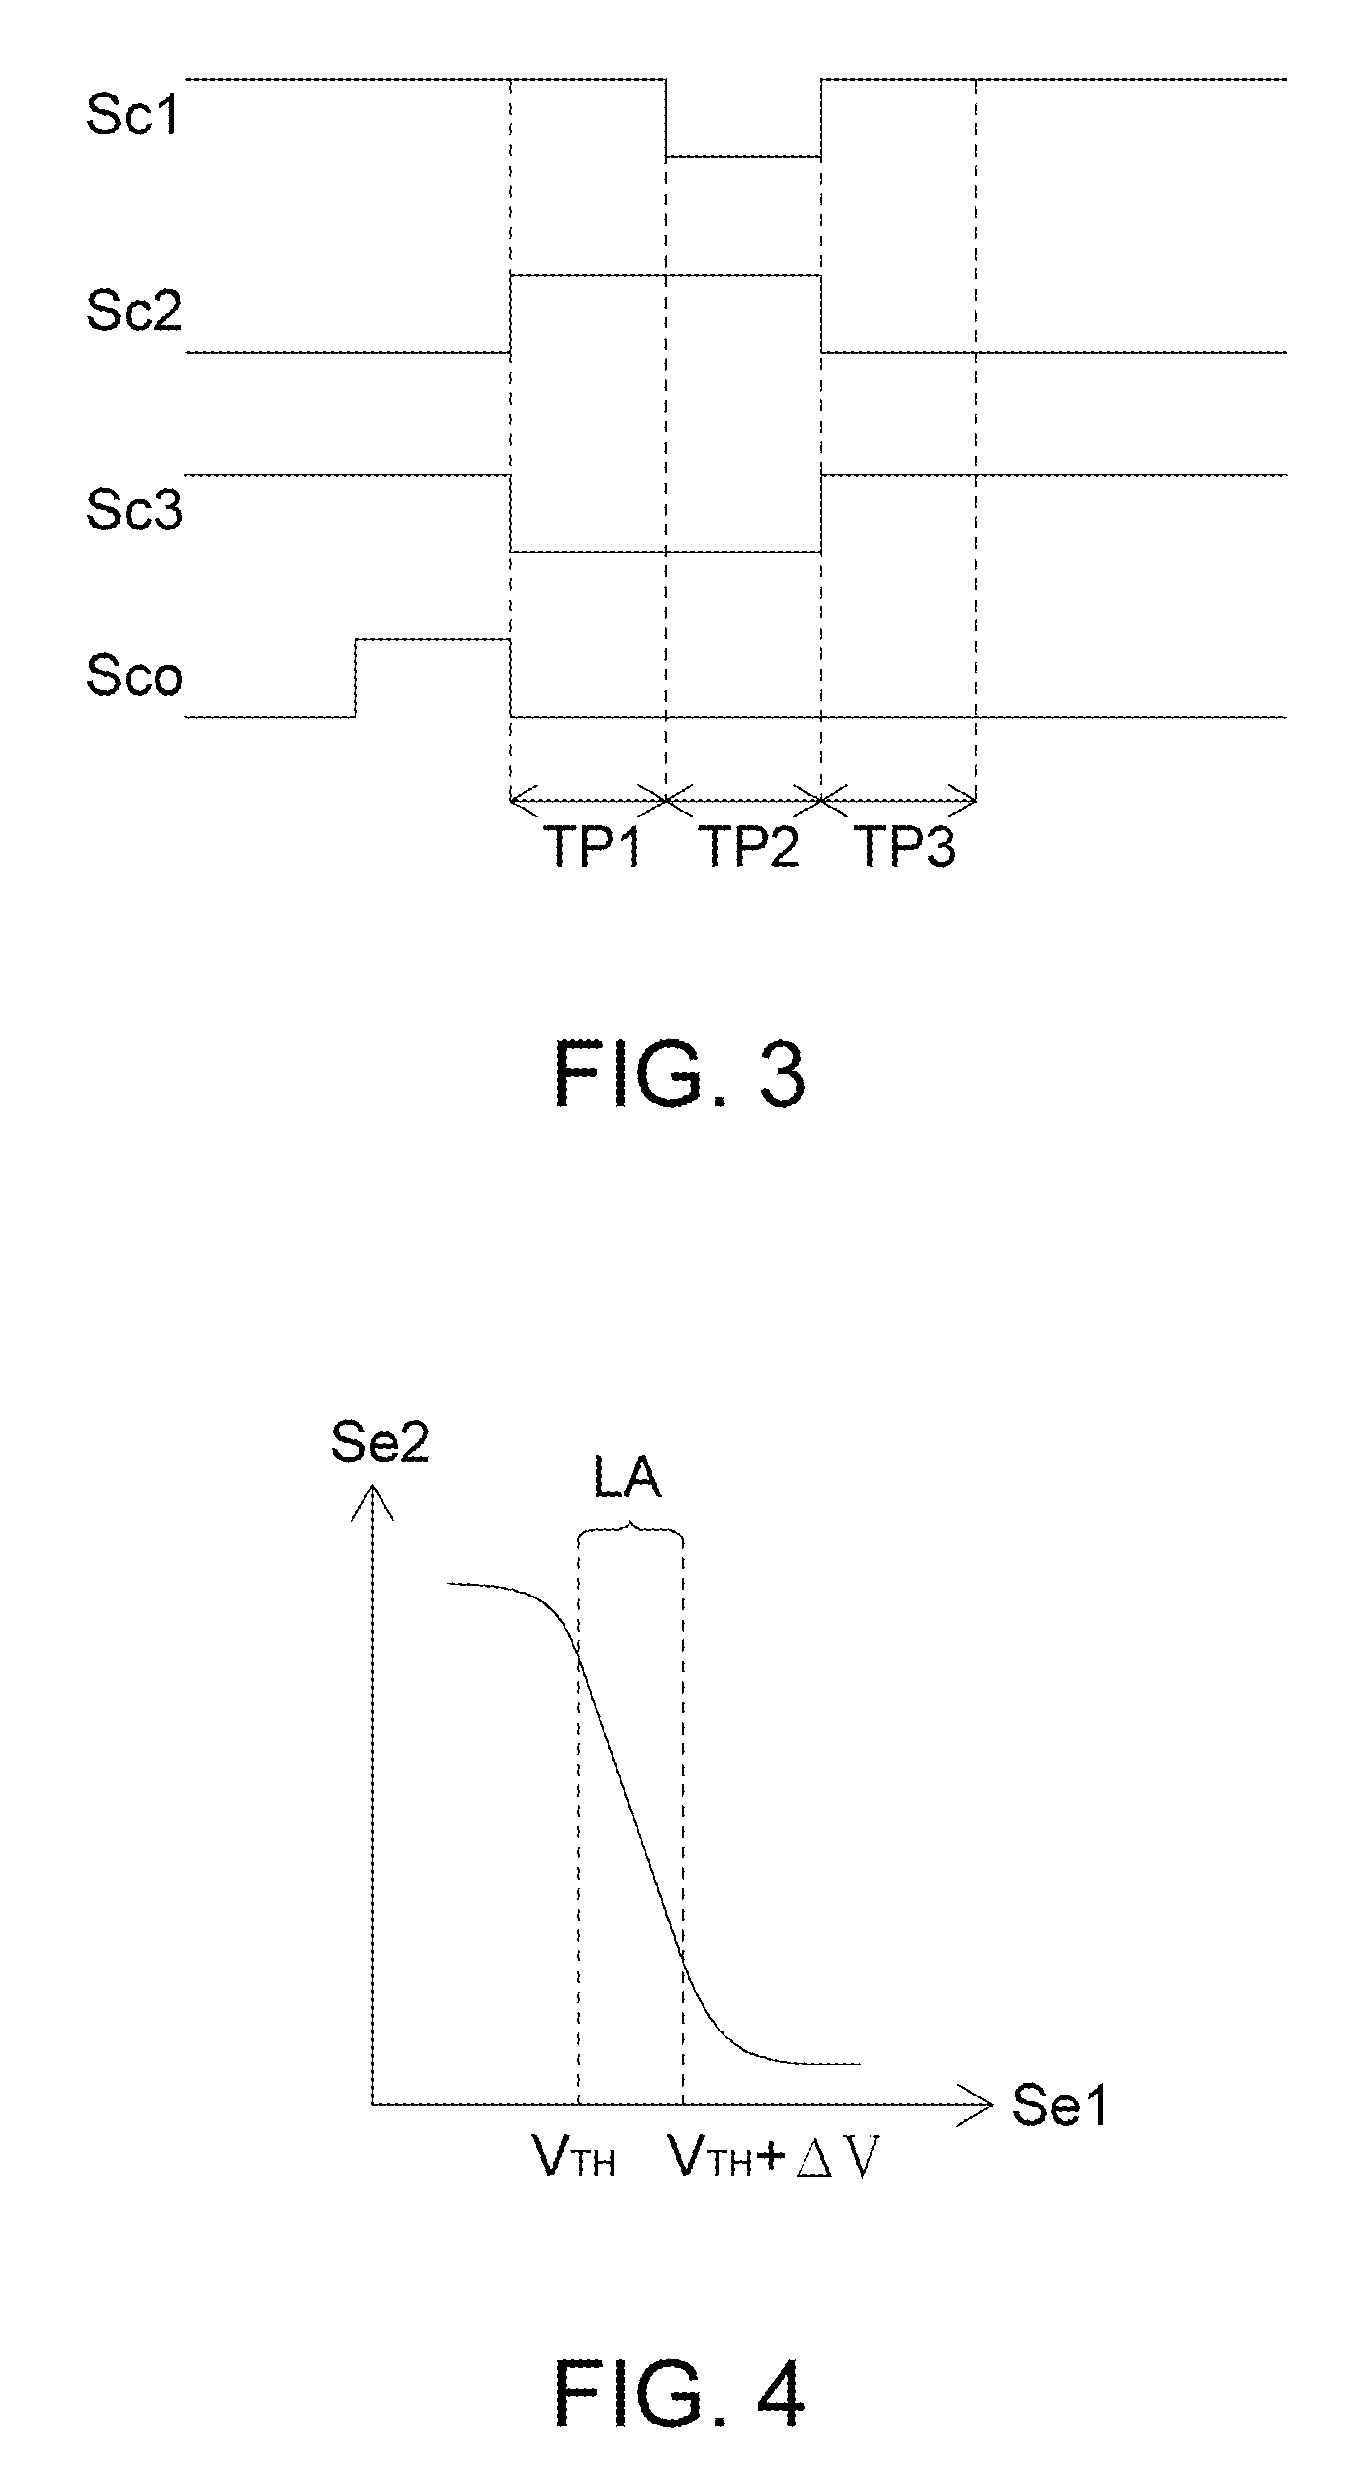 Photosensor circuit having a level shifting circuit for biasing a first node with an operation voltage signal and a phototransistor for modulating the level of the operation voltage signal